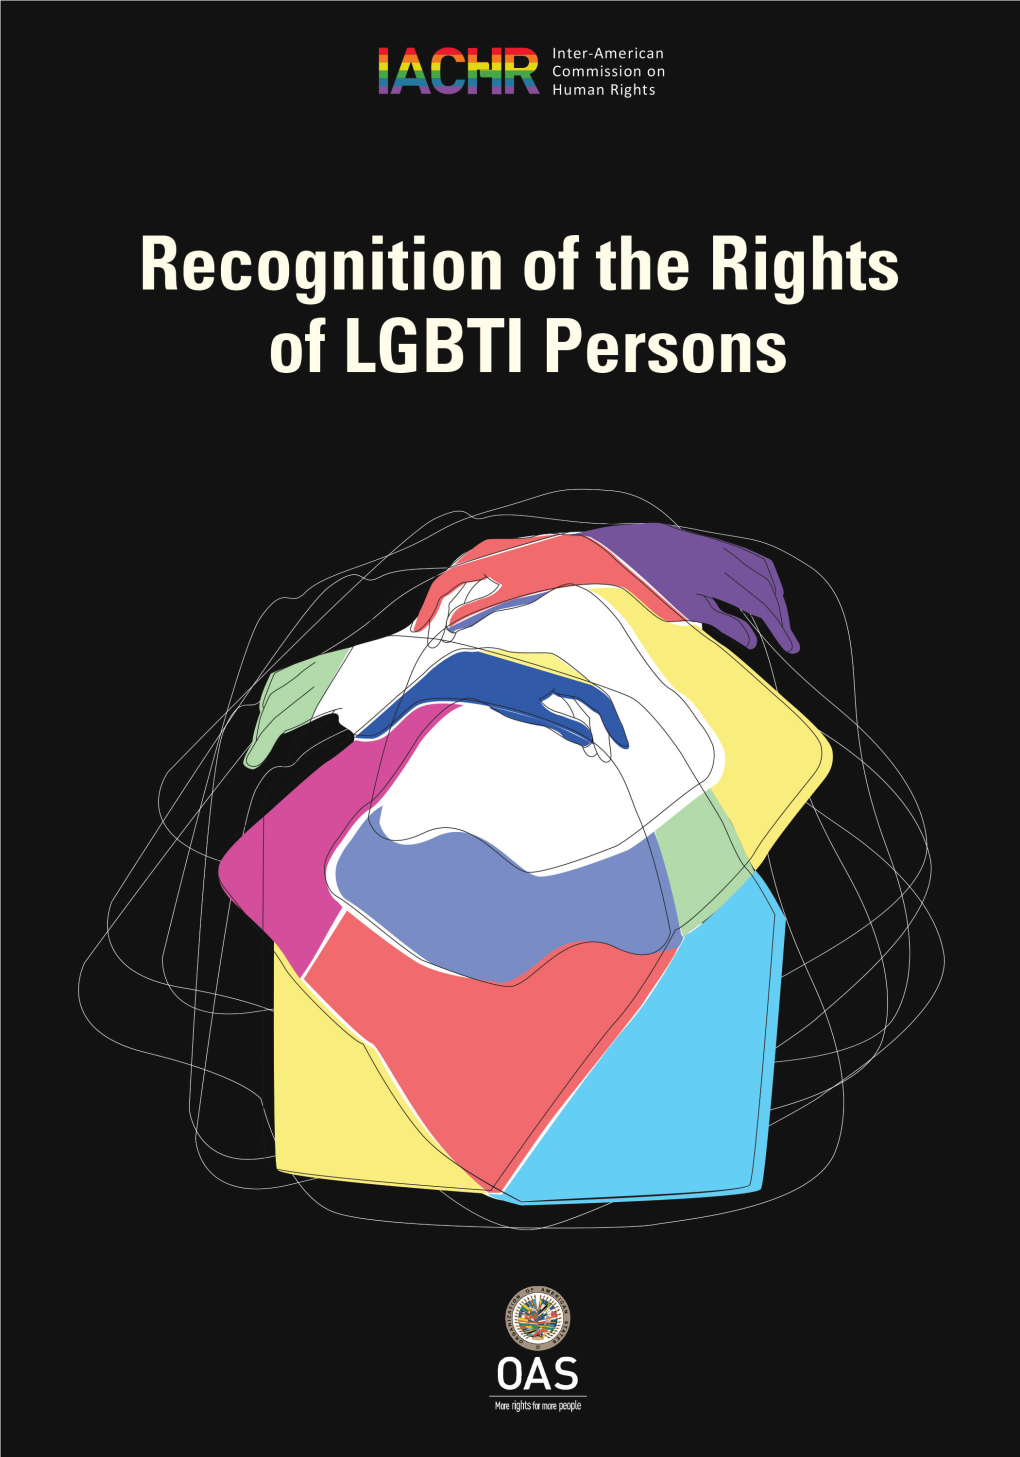 INTER-AMERICAN COMMISSION on HUMAN RIGHTS Advances and Challenges Towards the Recognition of the Rights of LGBTI Persons in the Americas